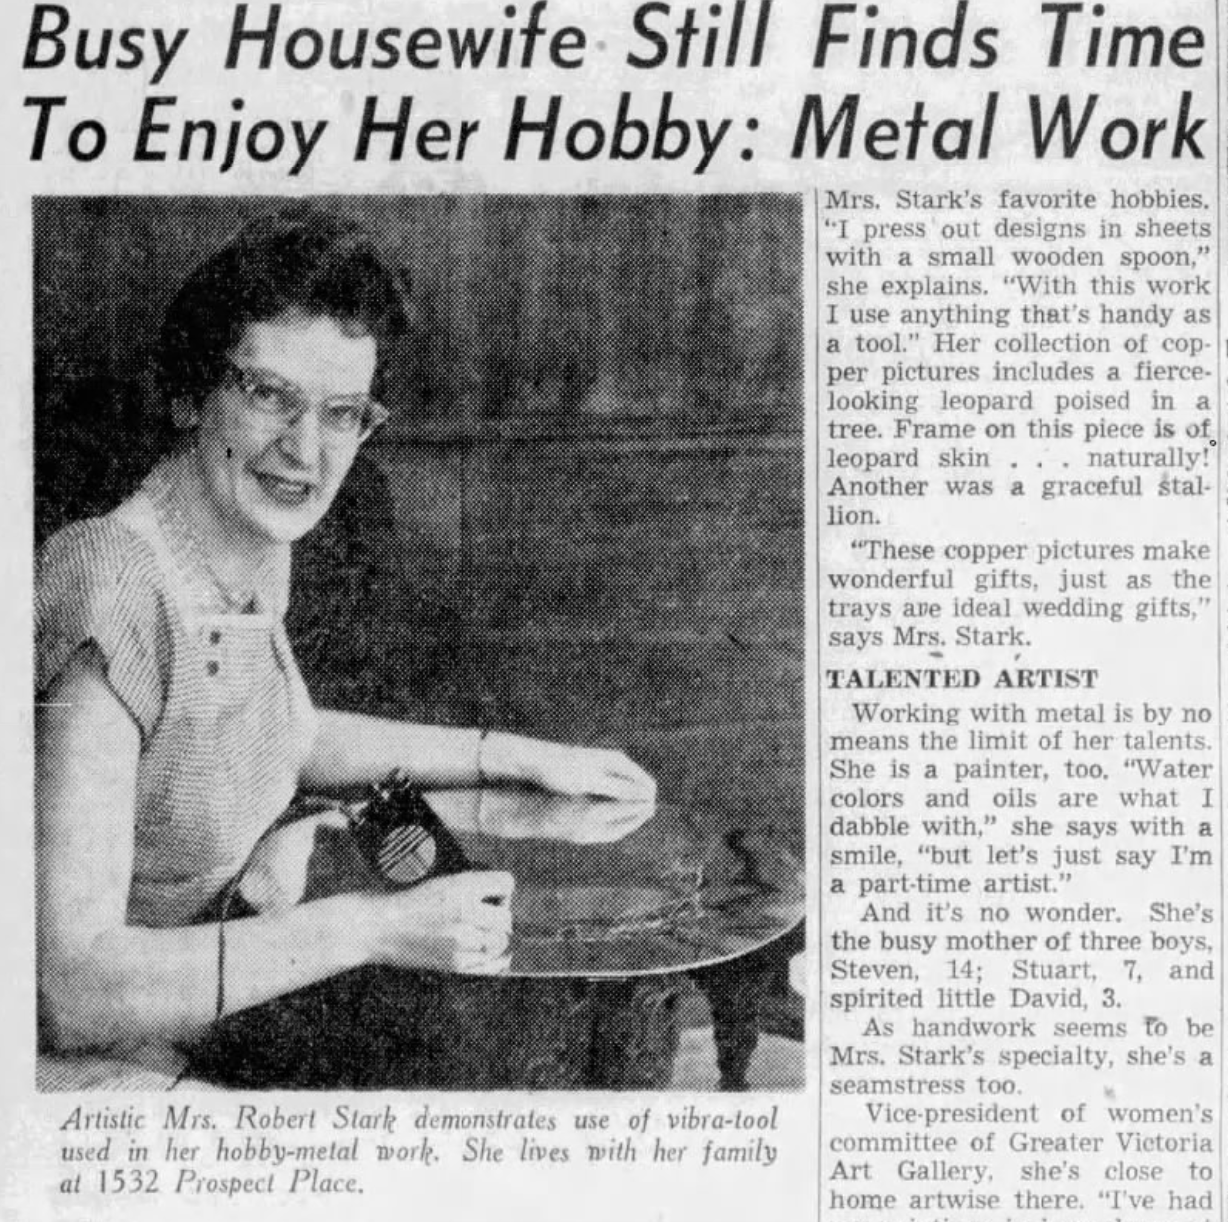 "Busy Housewife Still Finds Time To Enjoy Her Hobby: Metal Work"